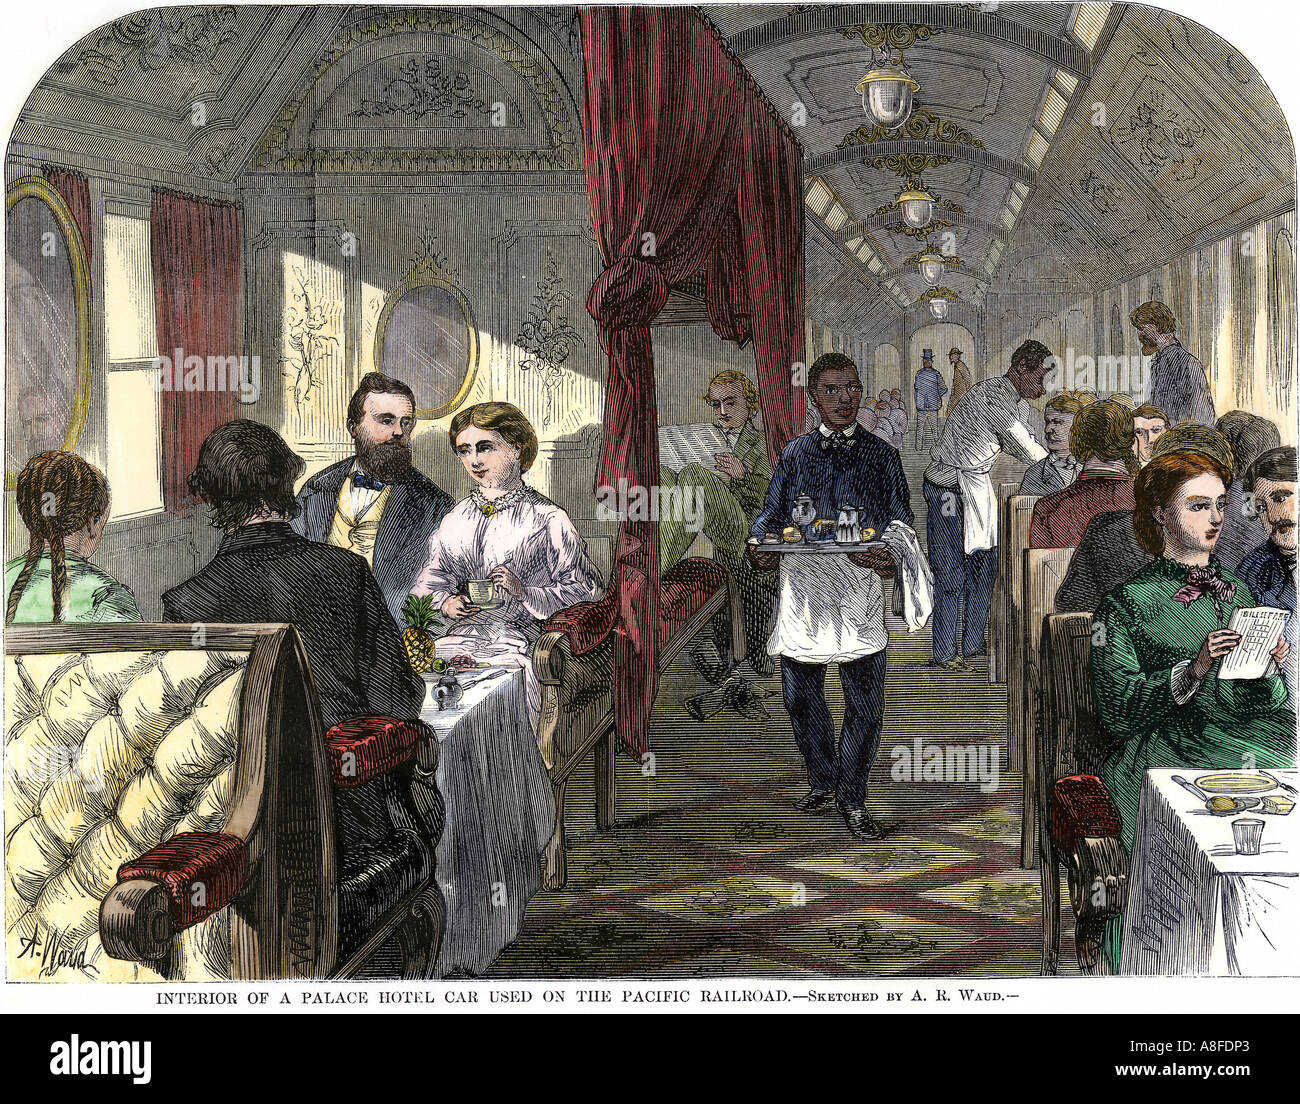 Palace Hotel dining car on the Union Pacific Railroad 1869. Hand-colored woodcut Stock Photo